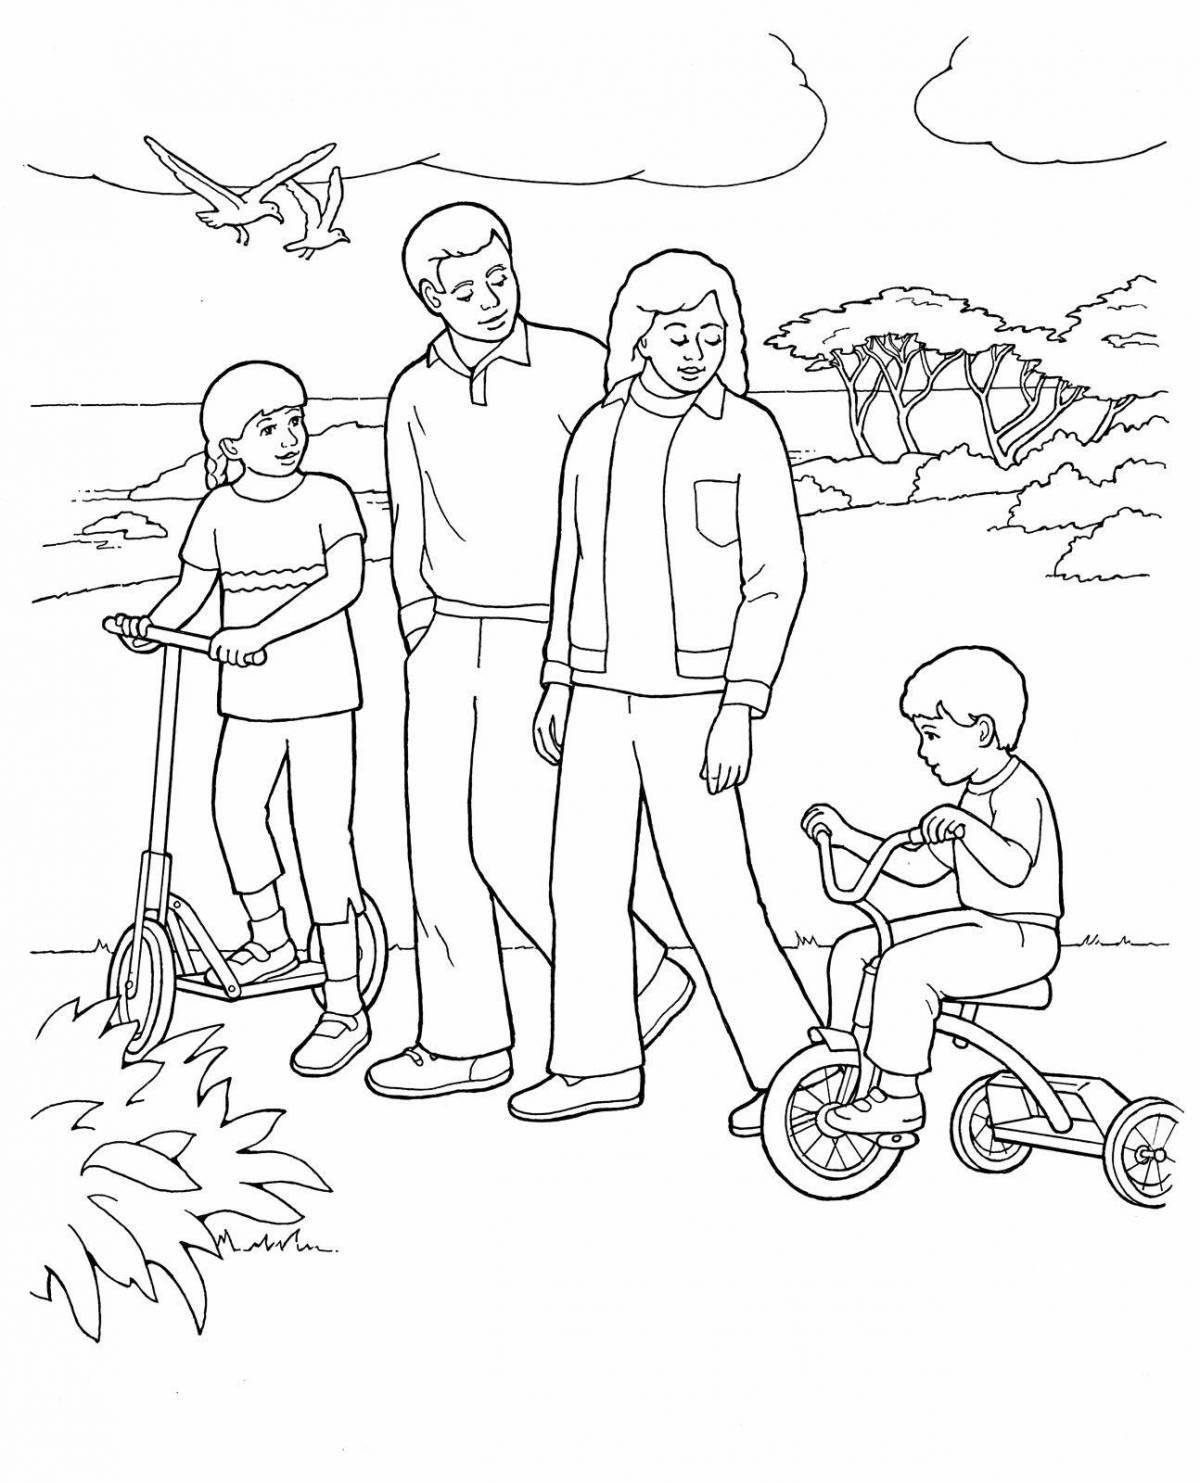 Coloring book adventurous family on vacation